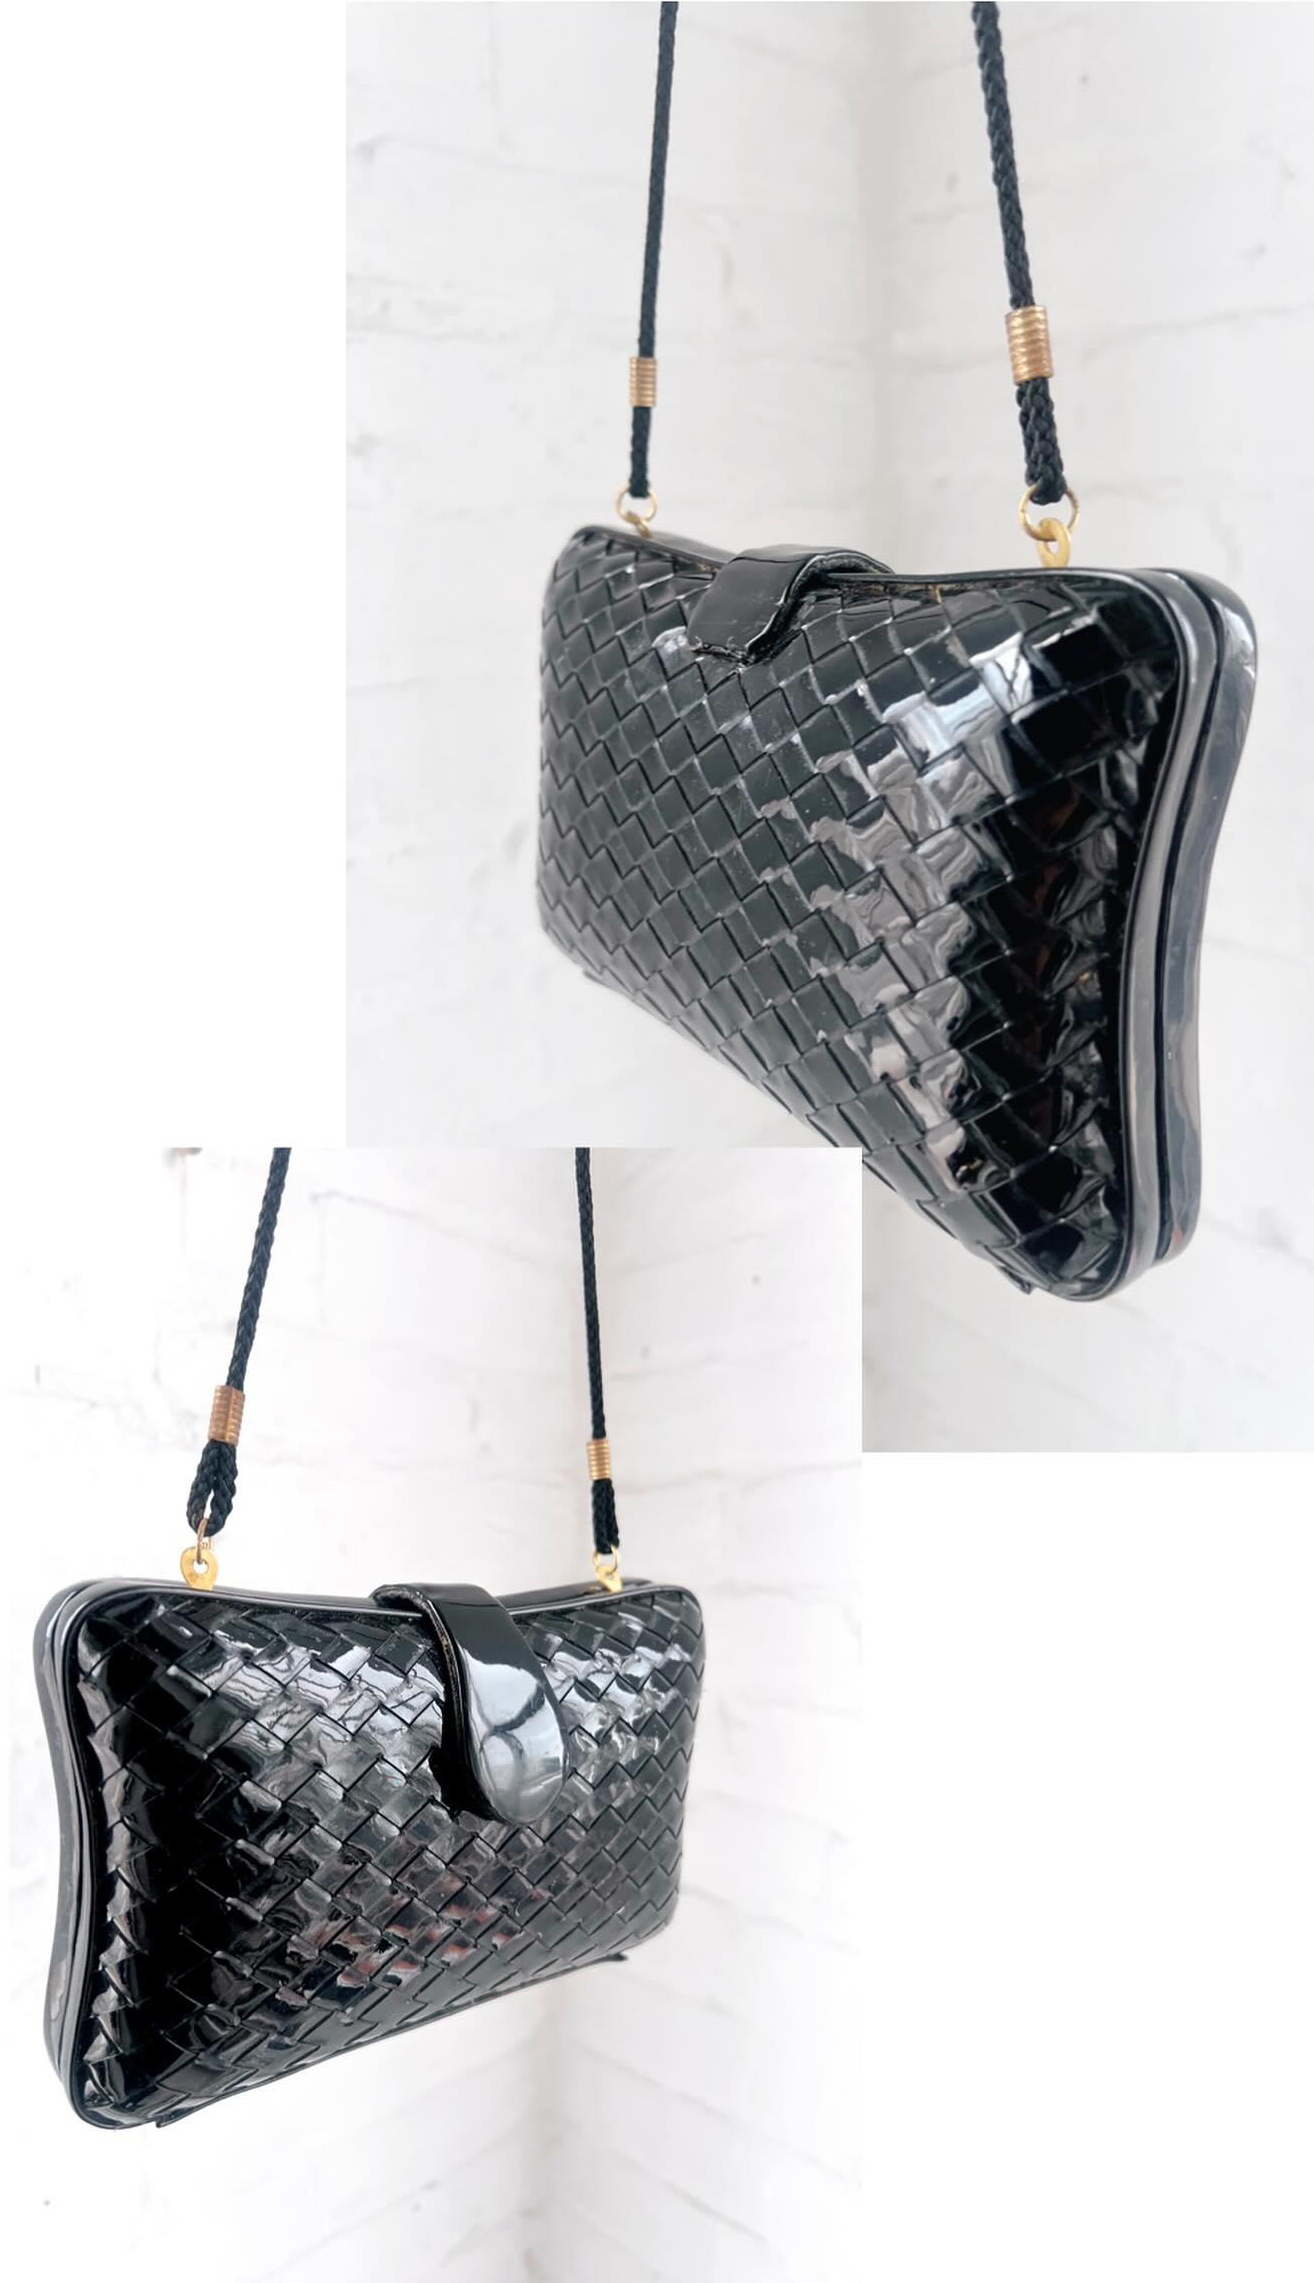 The Julia Leather Woven Tote bag in black – WorthAMillion